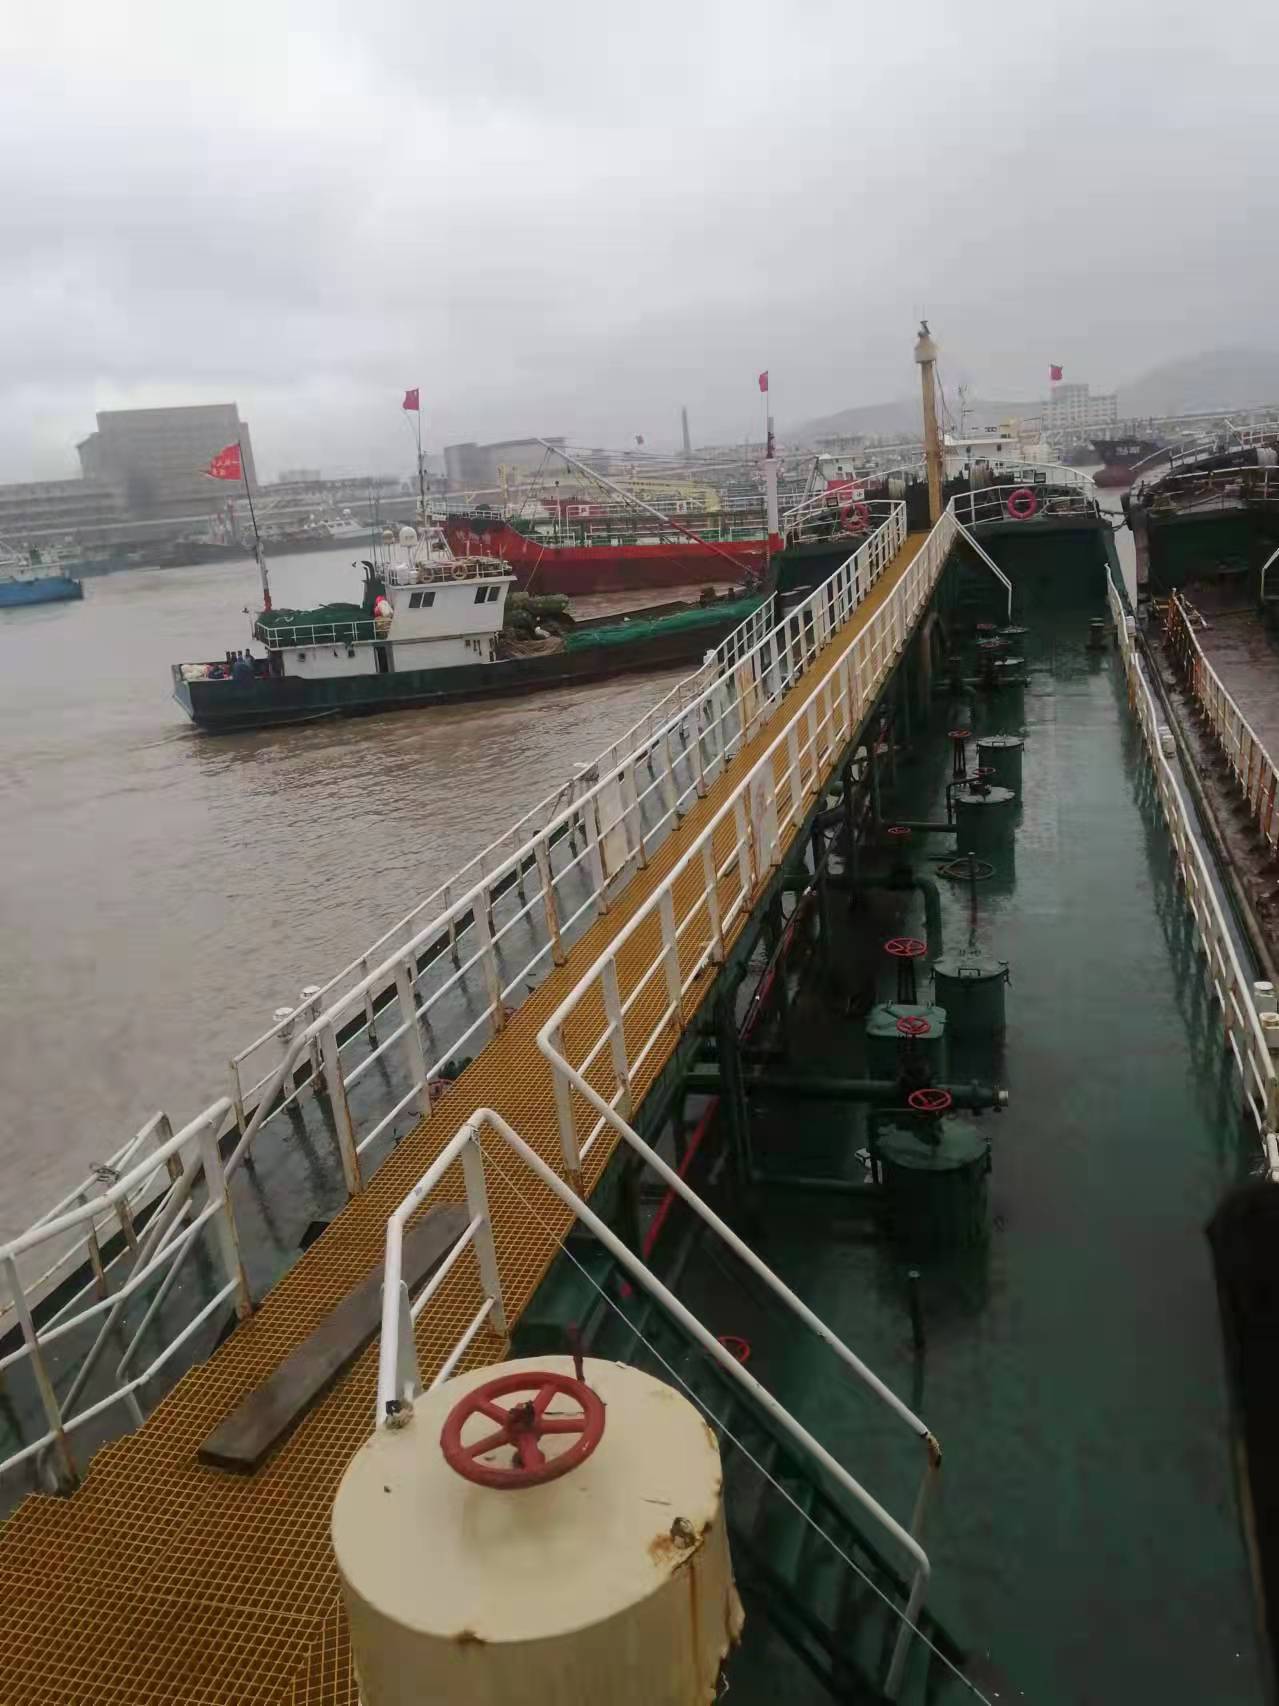 960 T Bunkering Ship For Sale